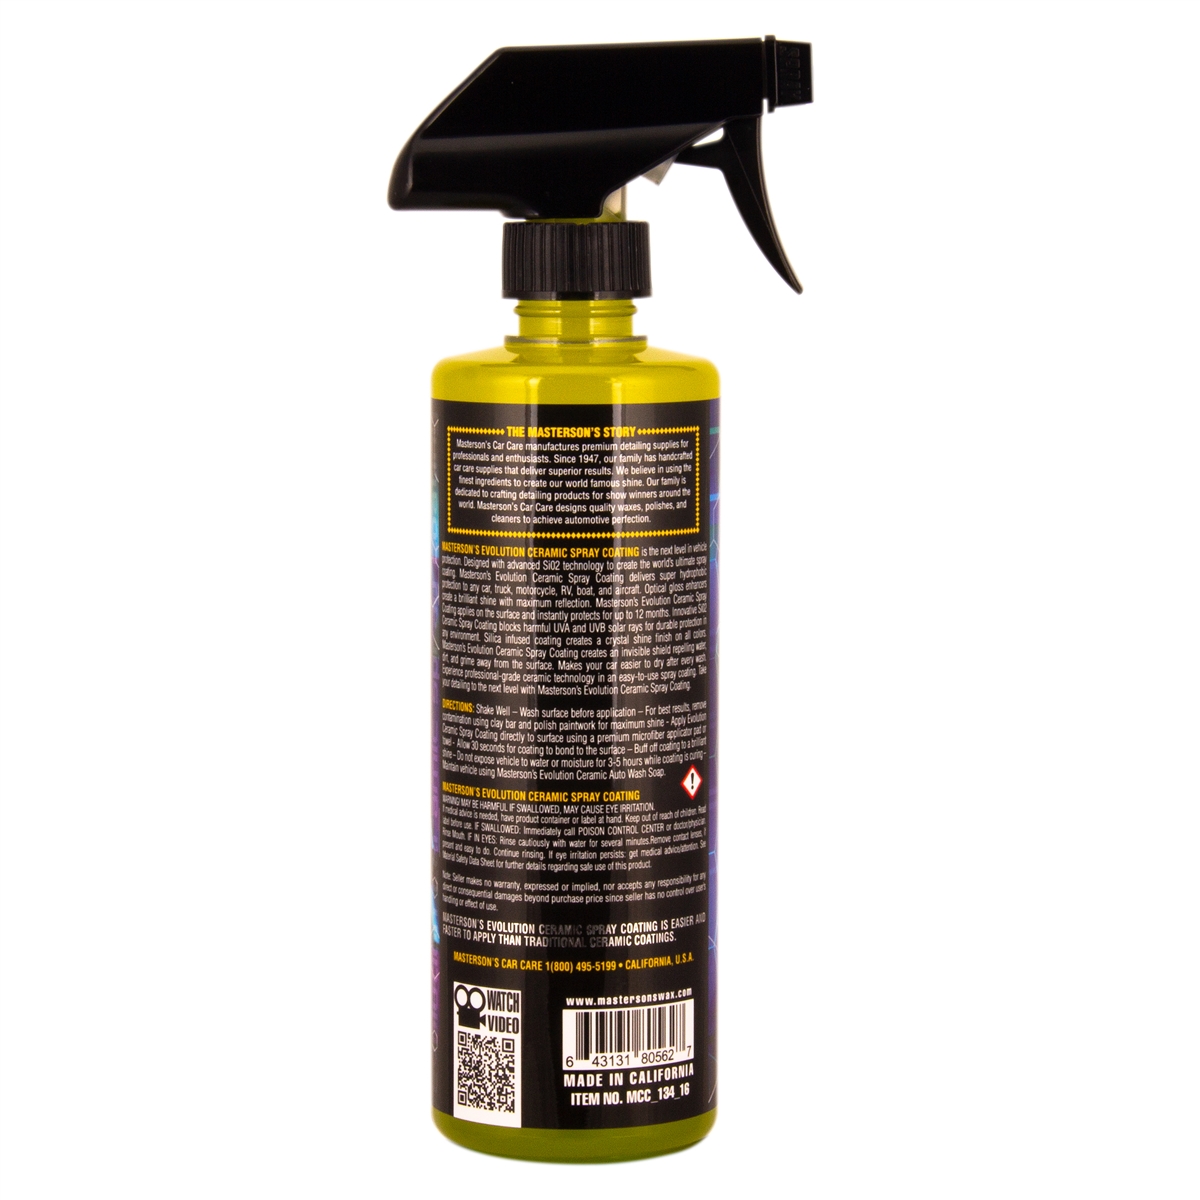 Ceramic Coating Spray – The 15 best products compared - Your Motor Guide